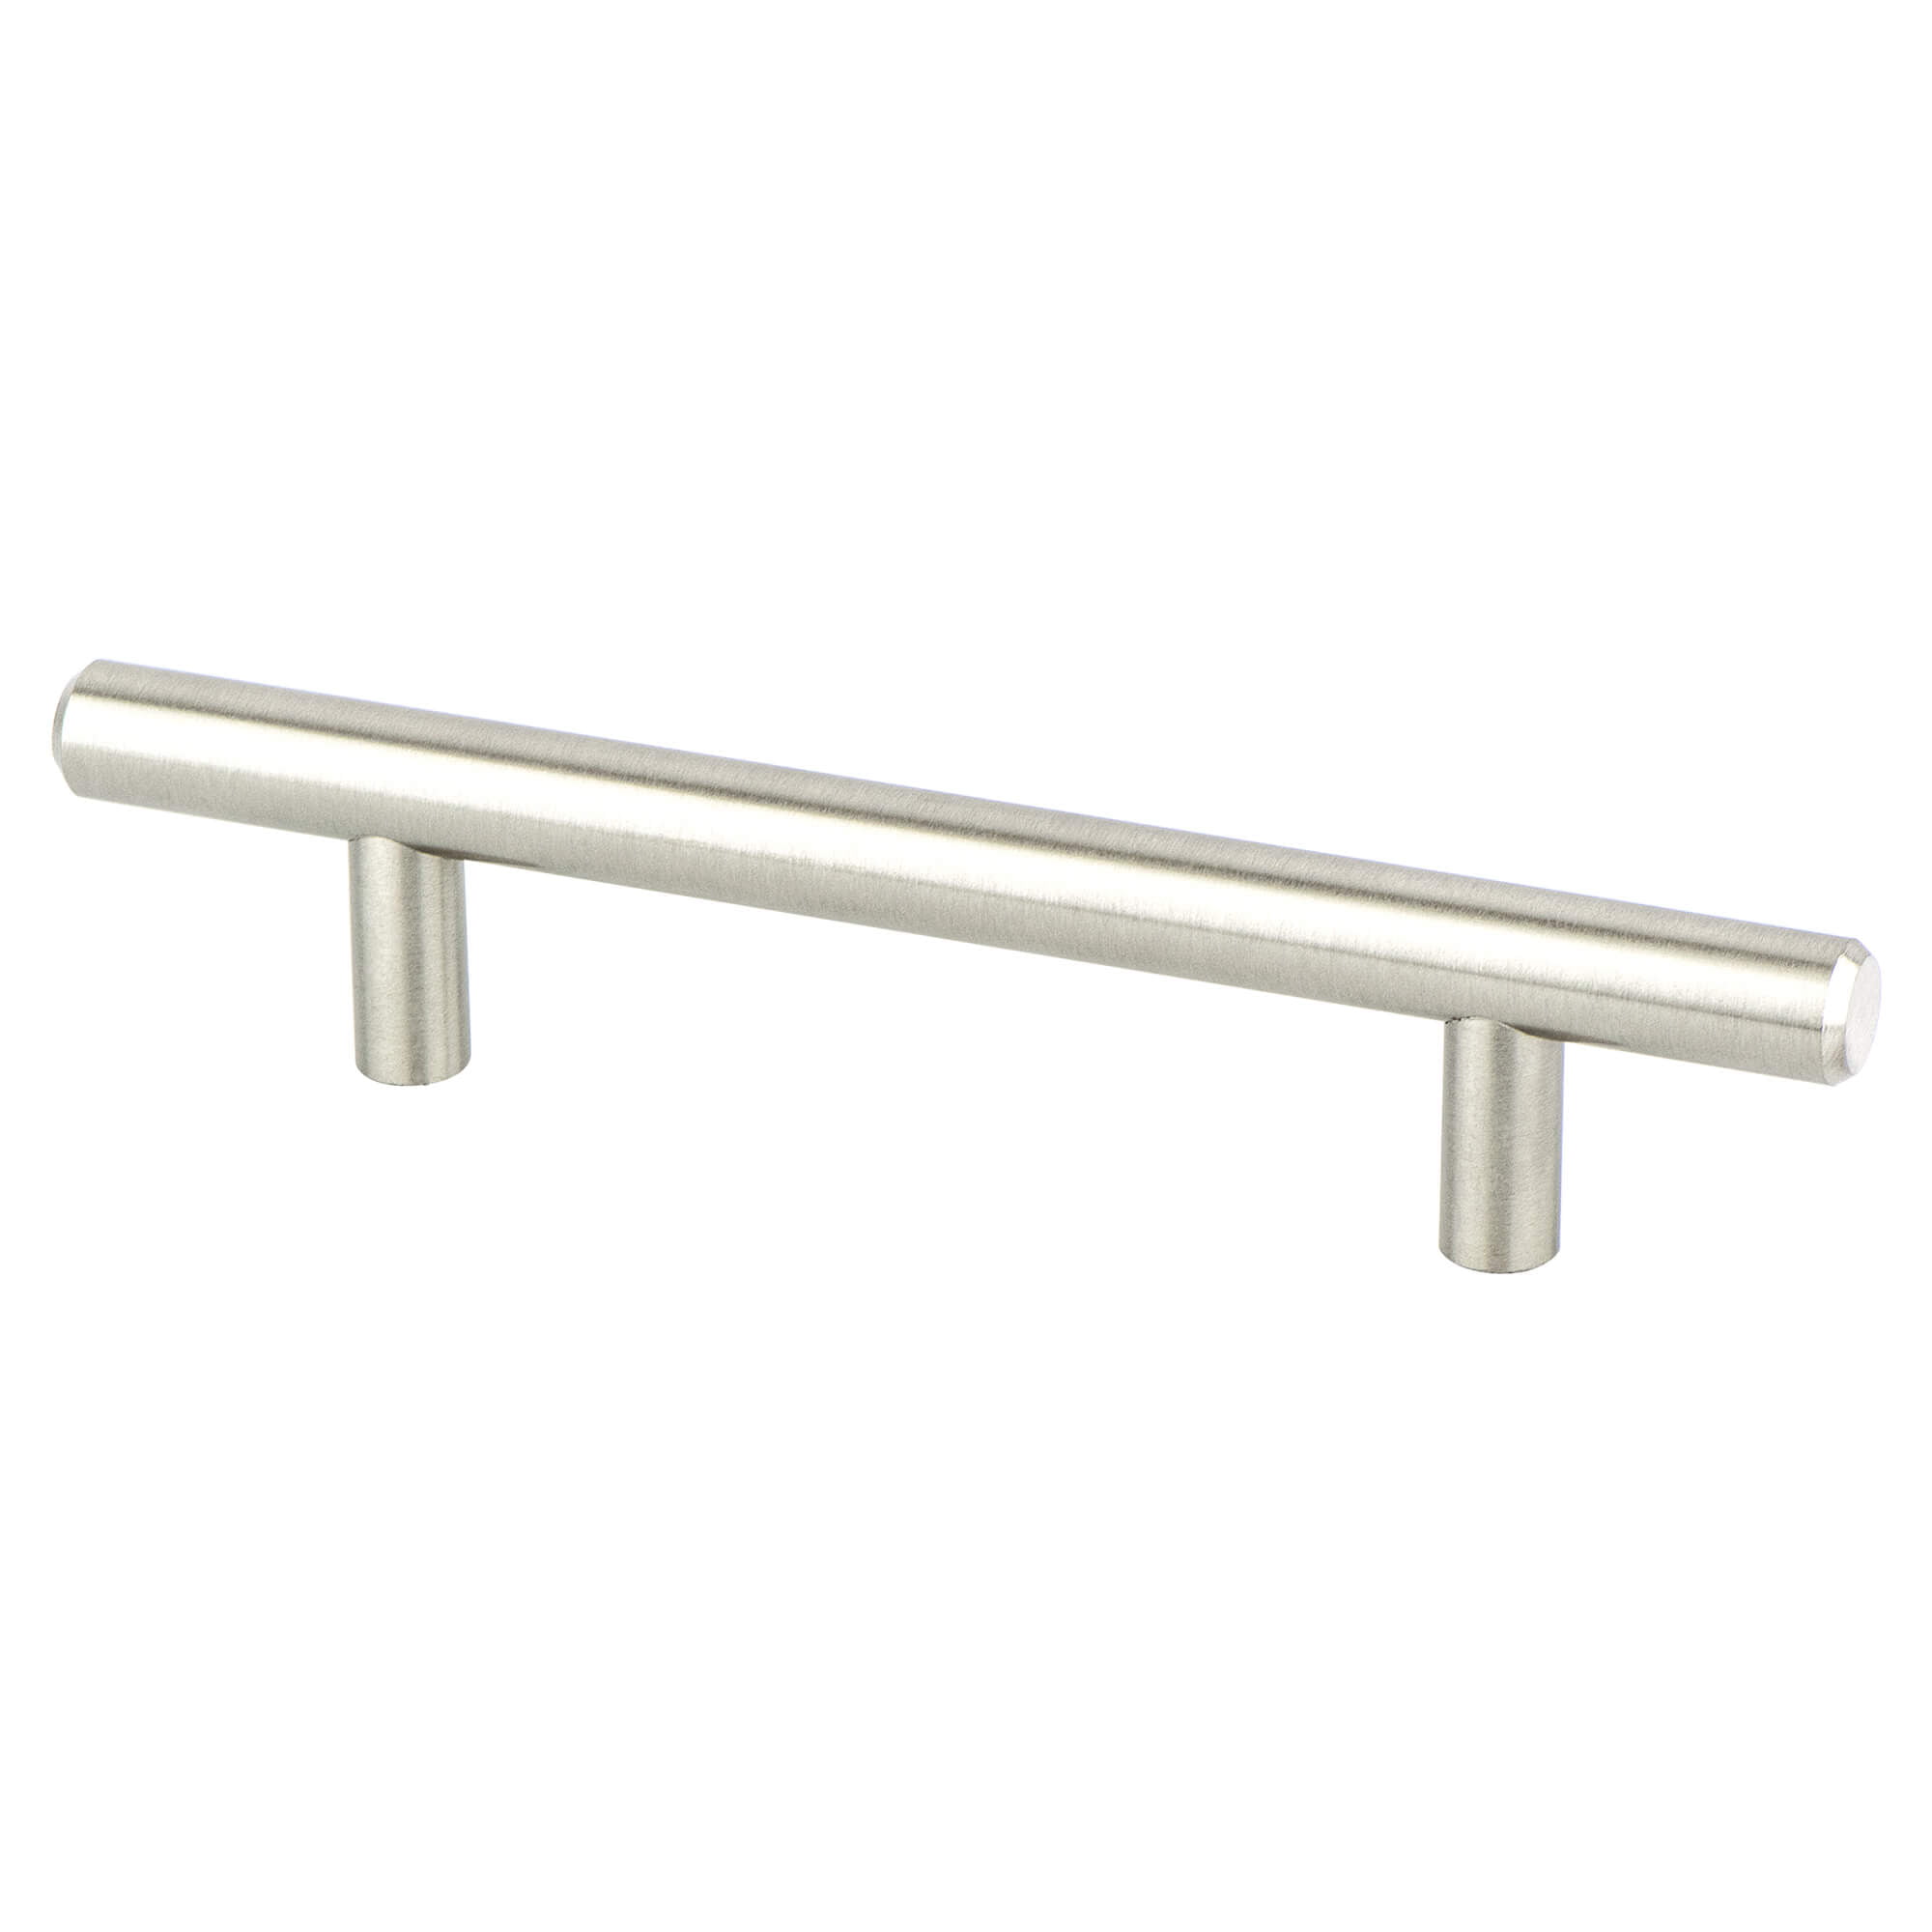 0802-2bpn-p 96 Mm Cc Tempo Pull With Brushed Nickel